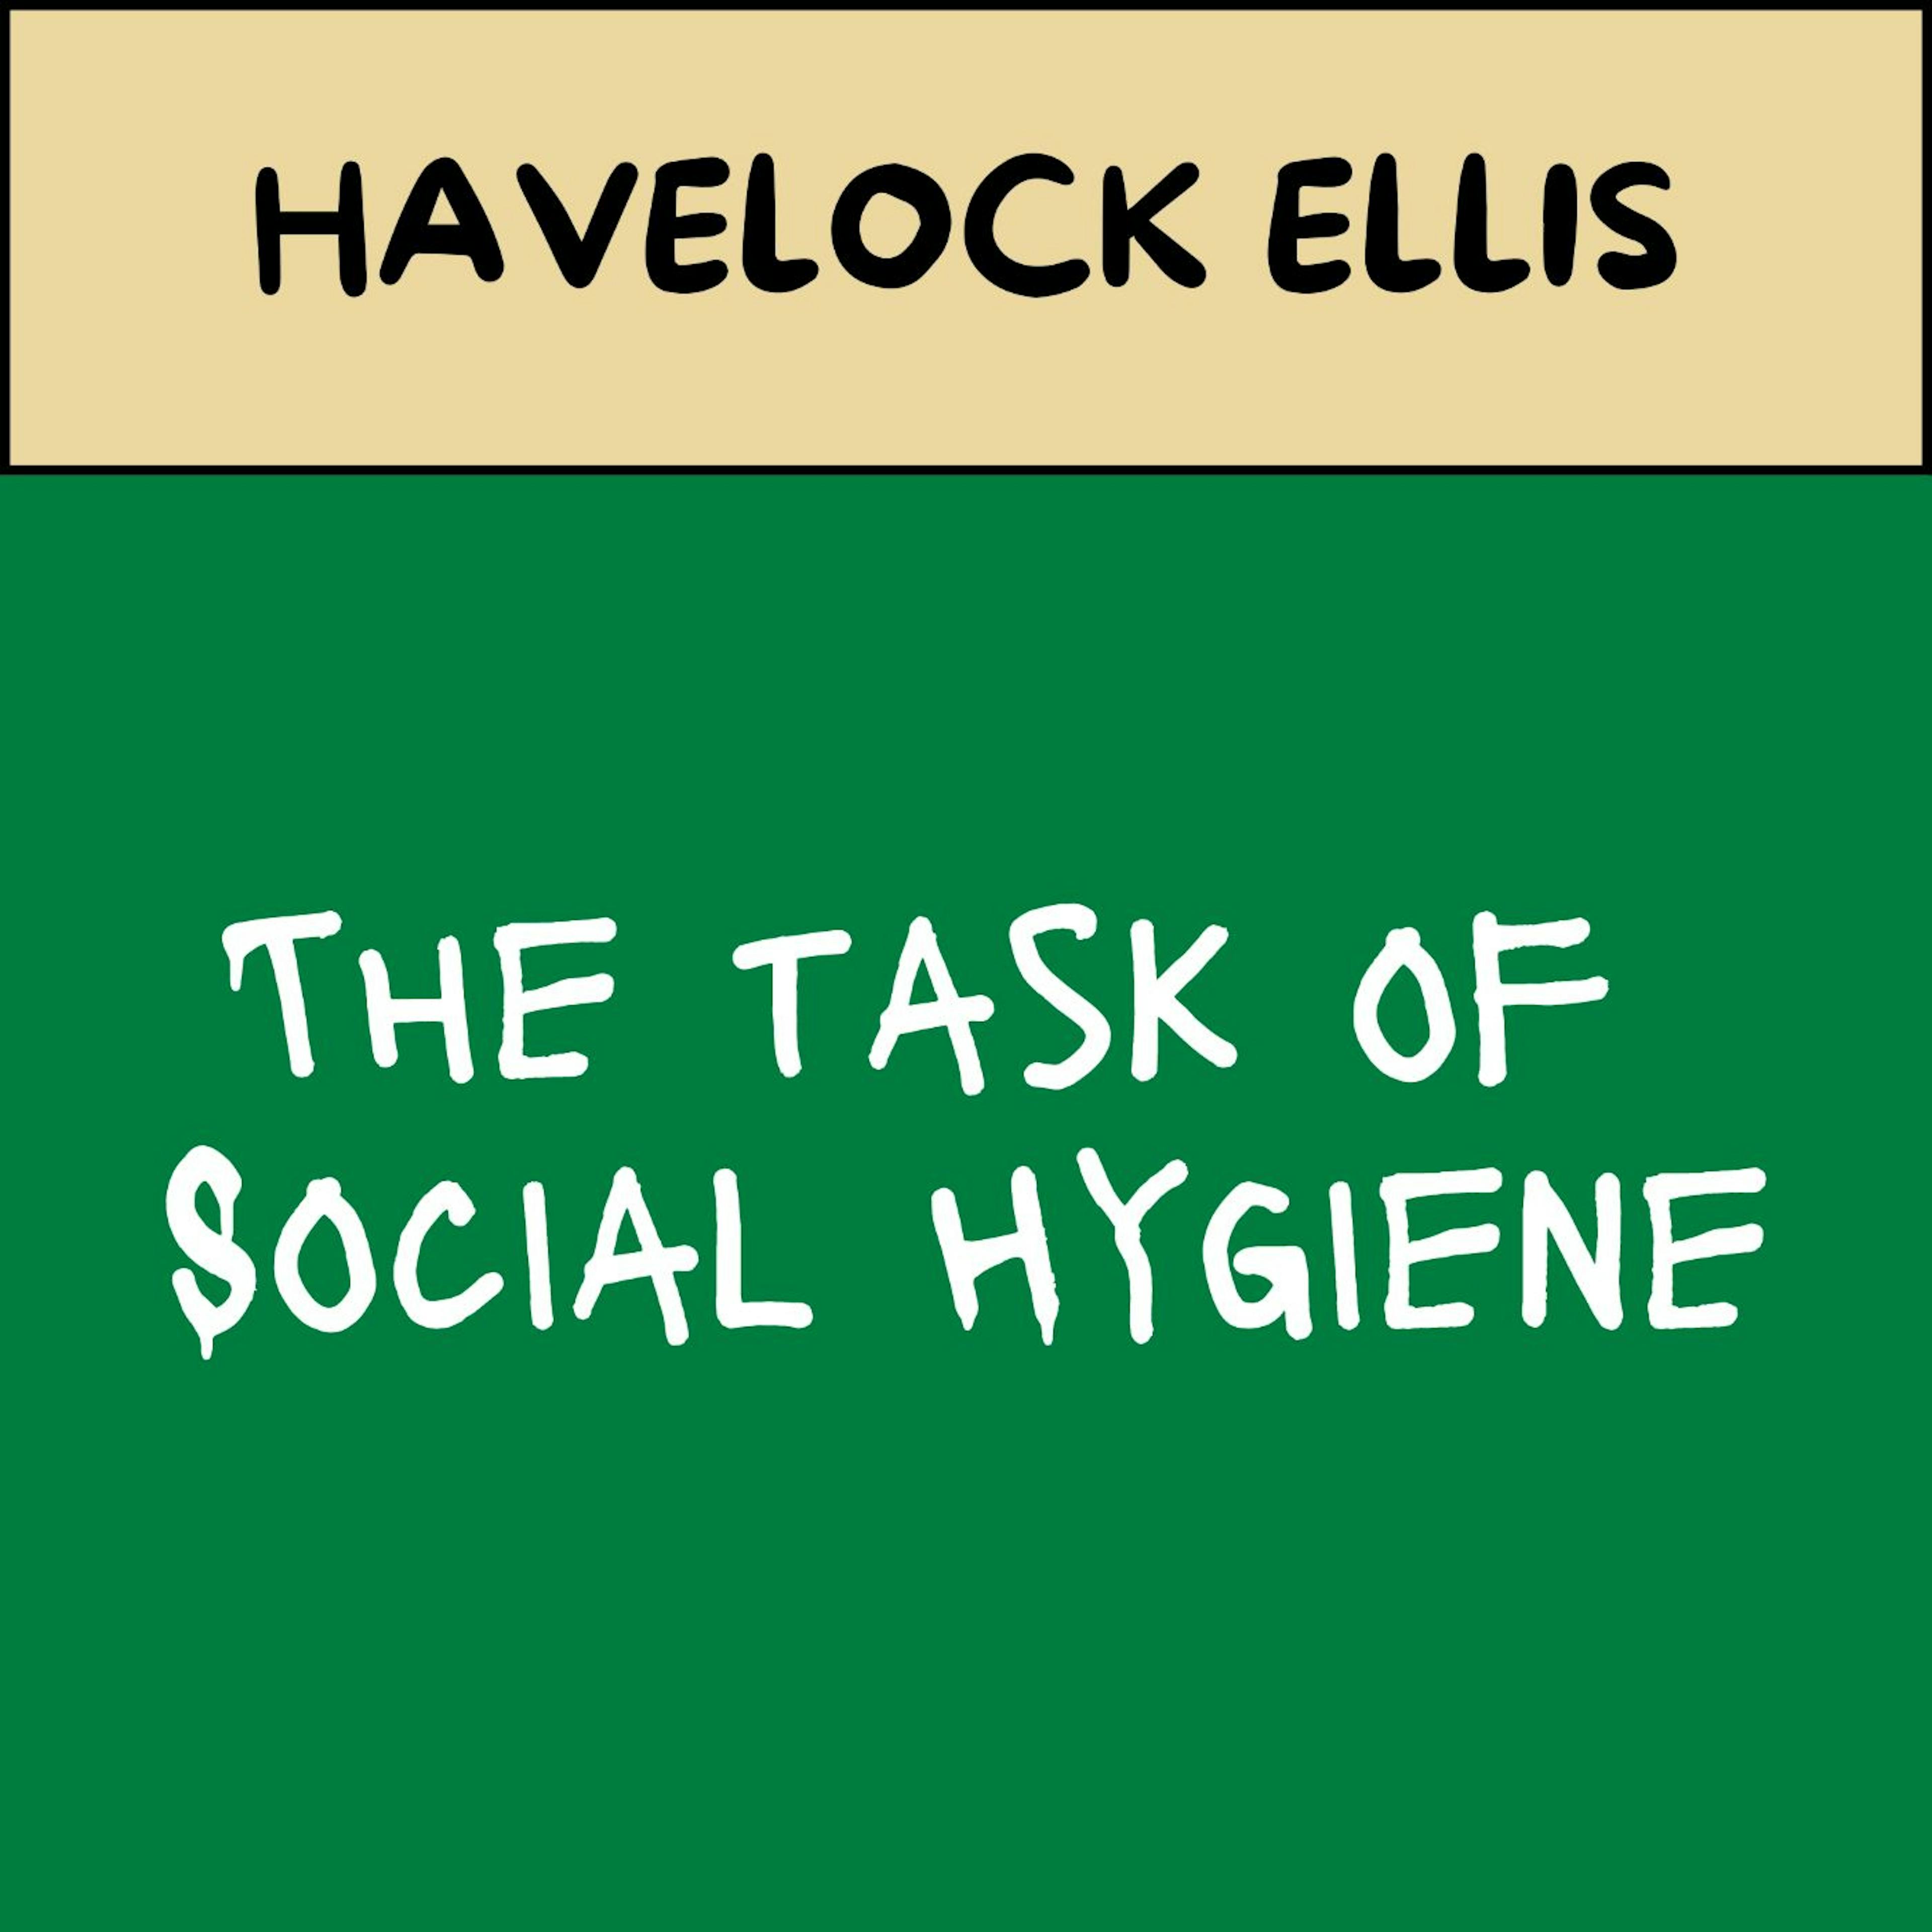 featured image - The Task of Social Hygiene by Havelock Ellis - Table of Links